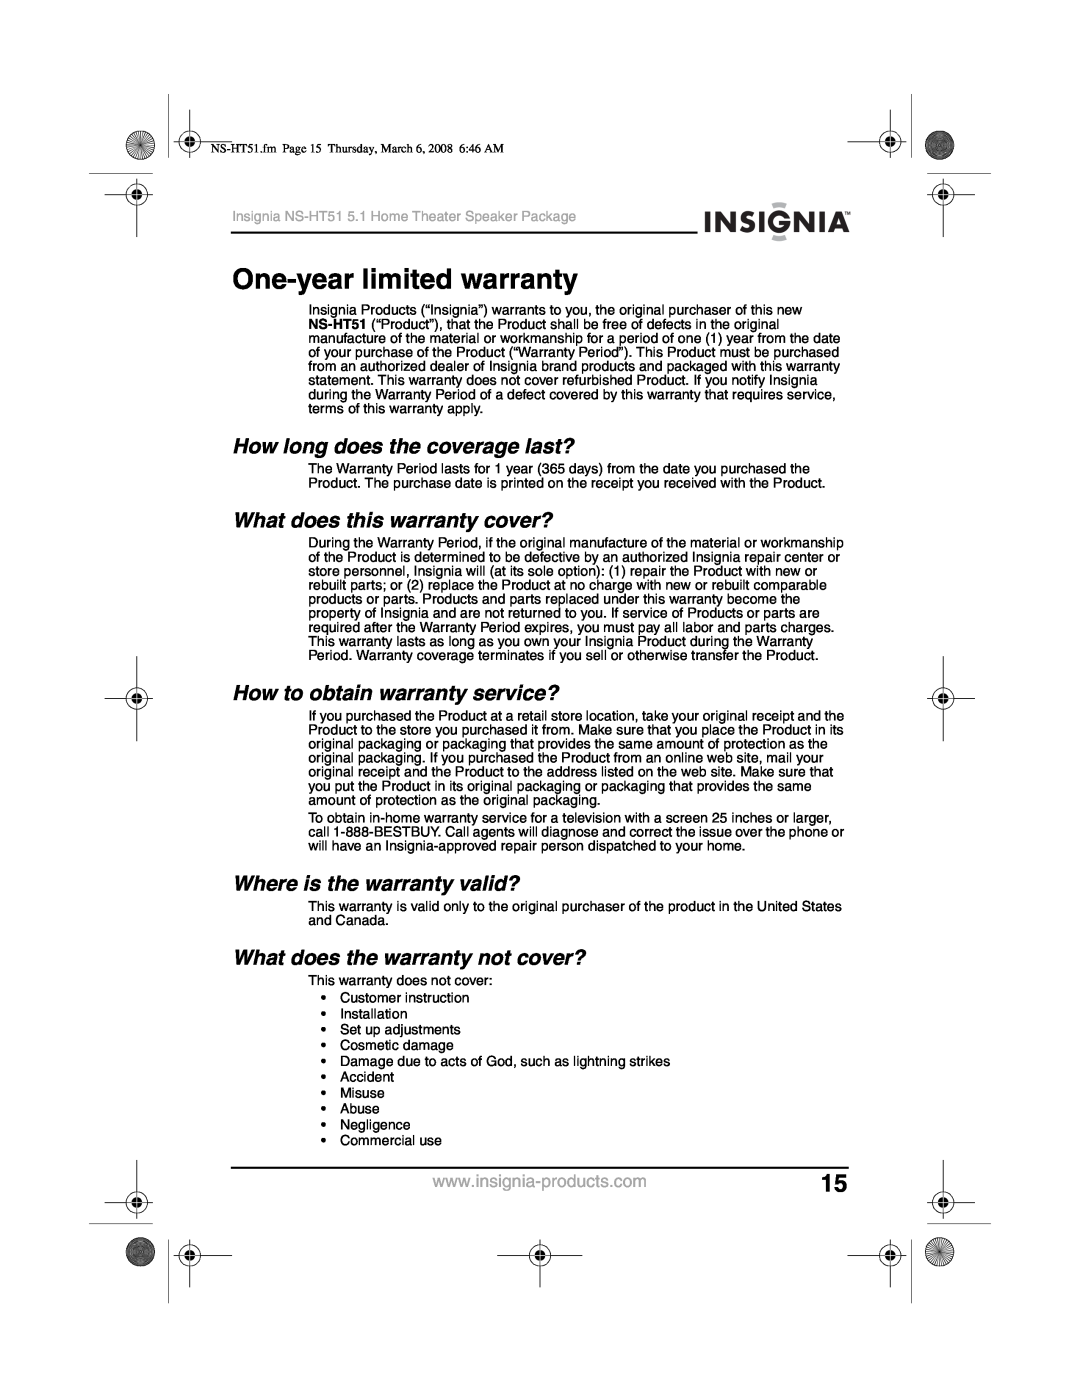 Insignia NS-HT51 manual One-yearlimited warranty, How long does the coverage last?, What does this warranty cover? 